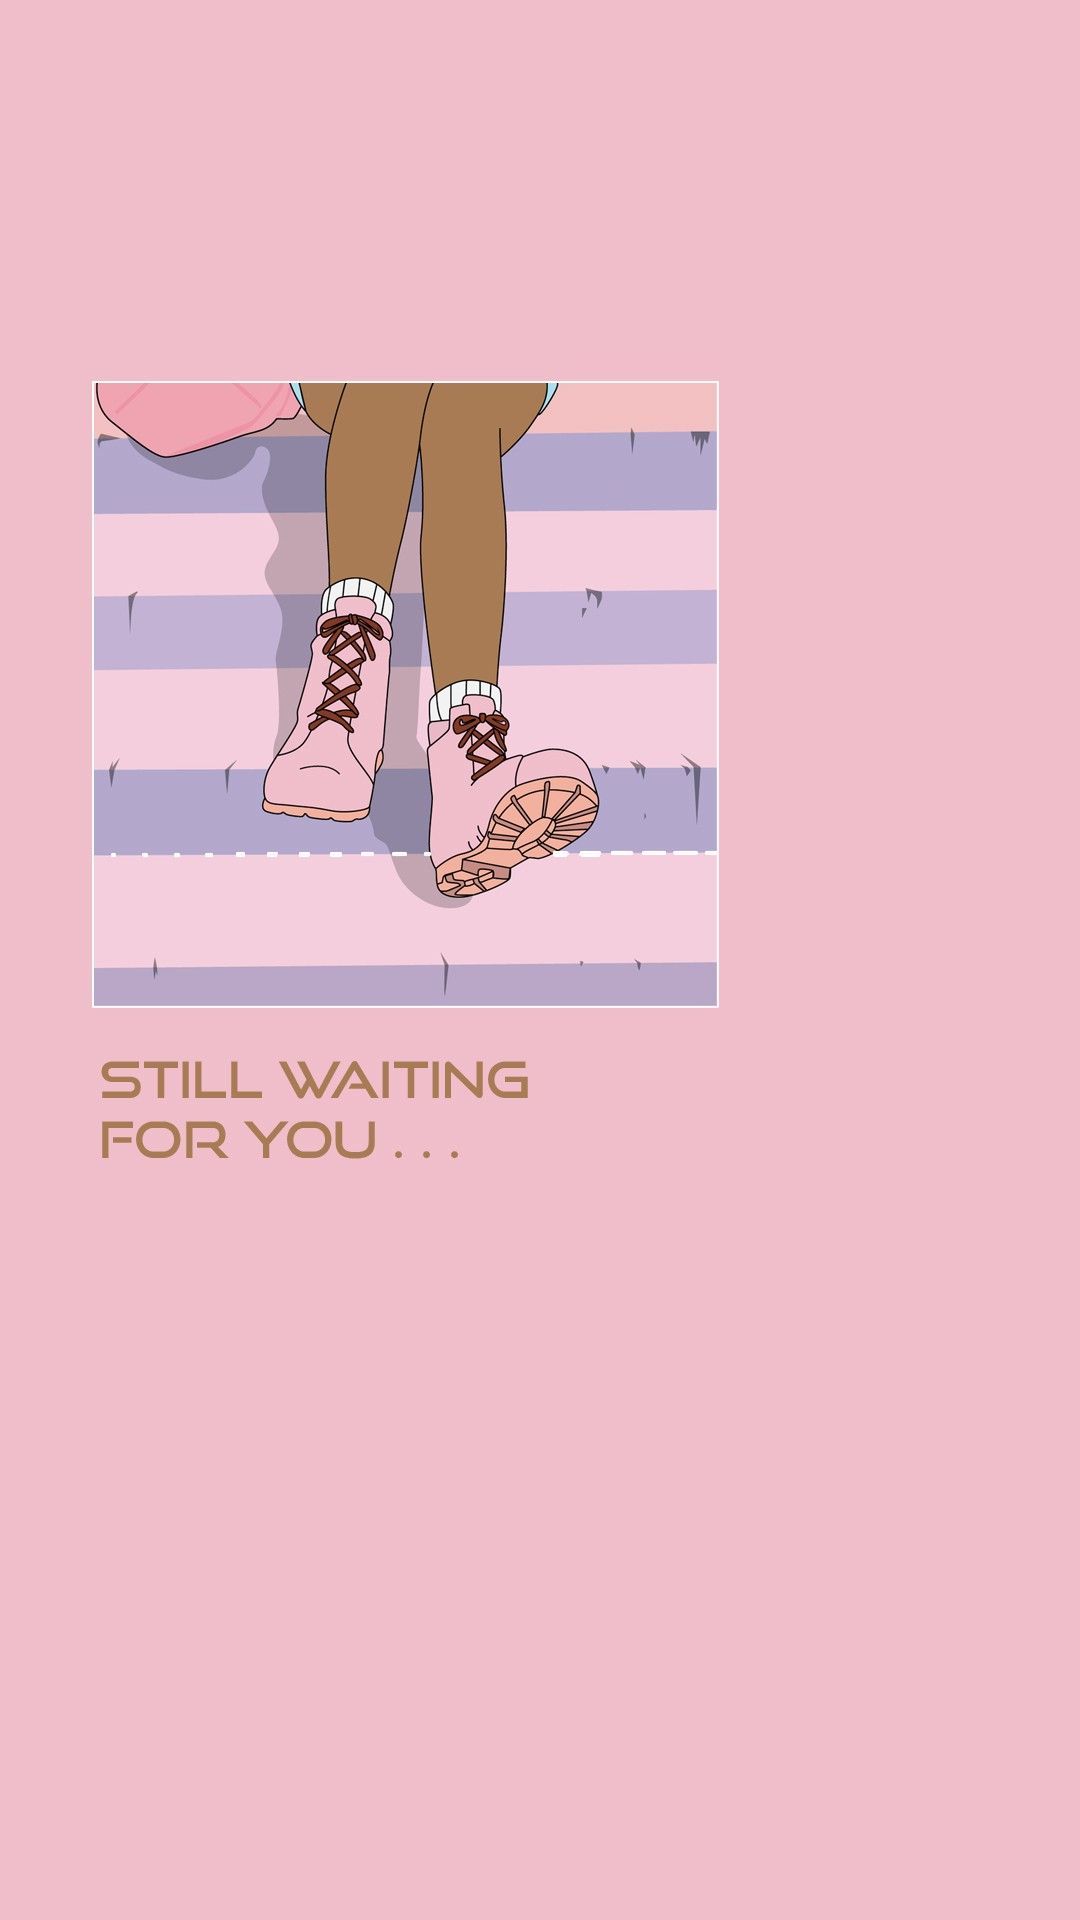 Still Waiting For You. #quote #anime #manga #lifestyle. Cute